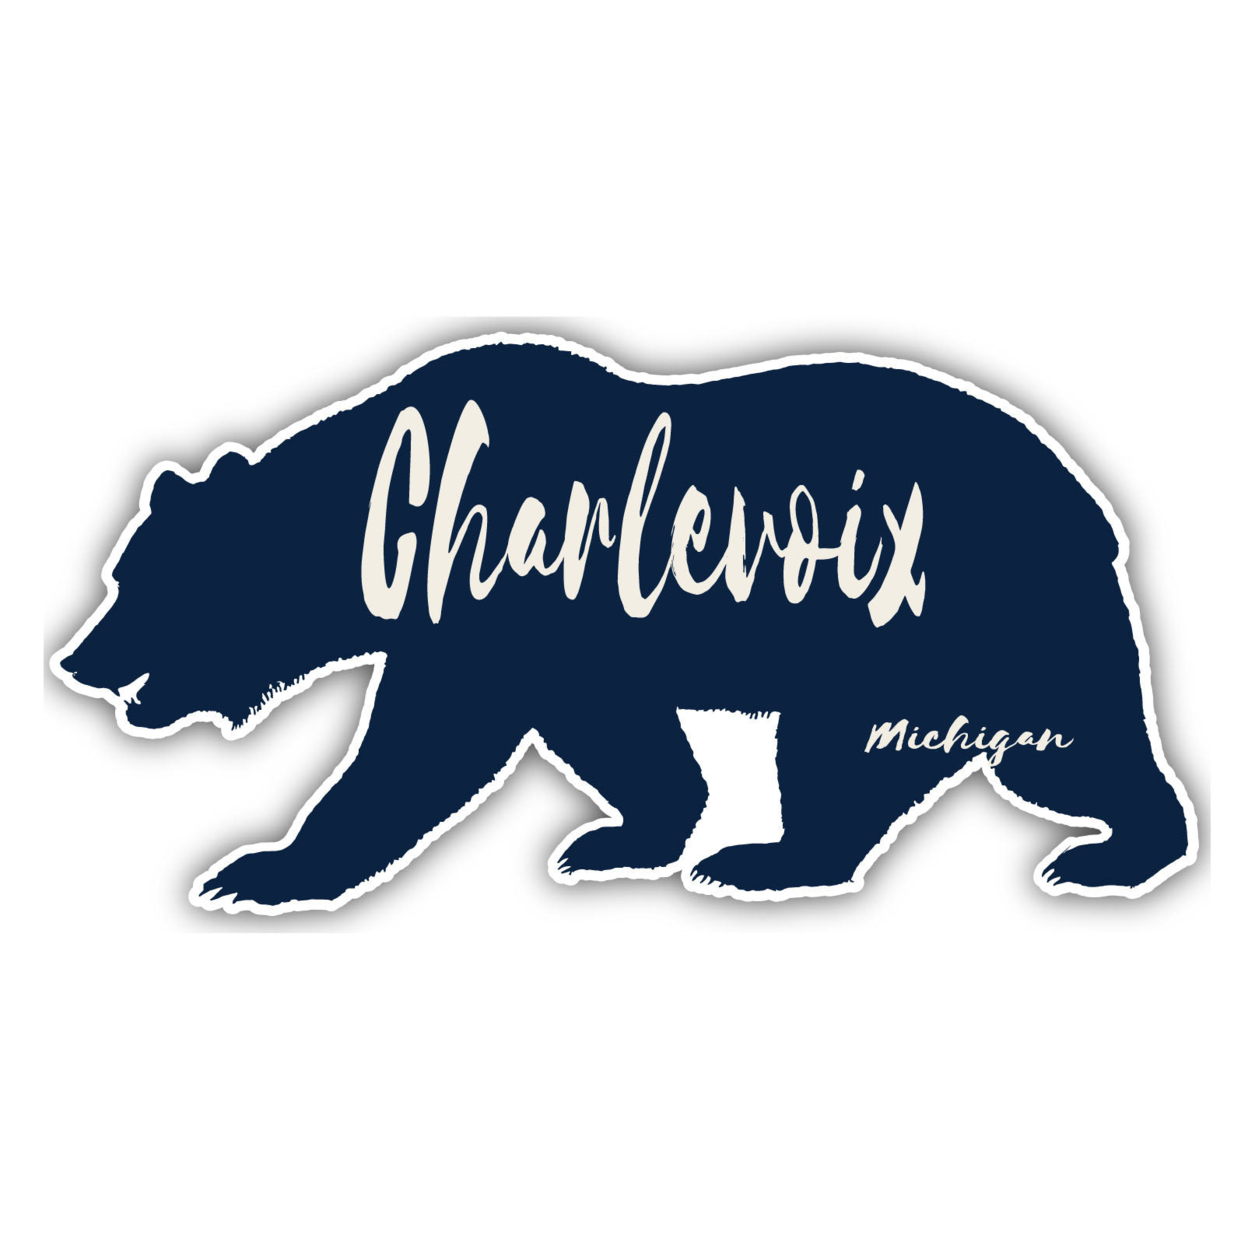 Charlevoix Michigan Souvenir Decorative Stickers (Choose Theme And Size) - 4-Pack, 2-Inch, Bear